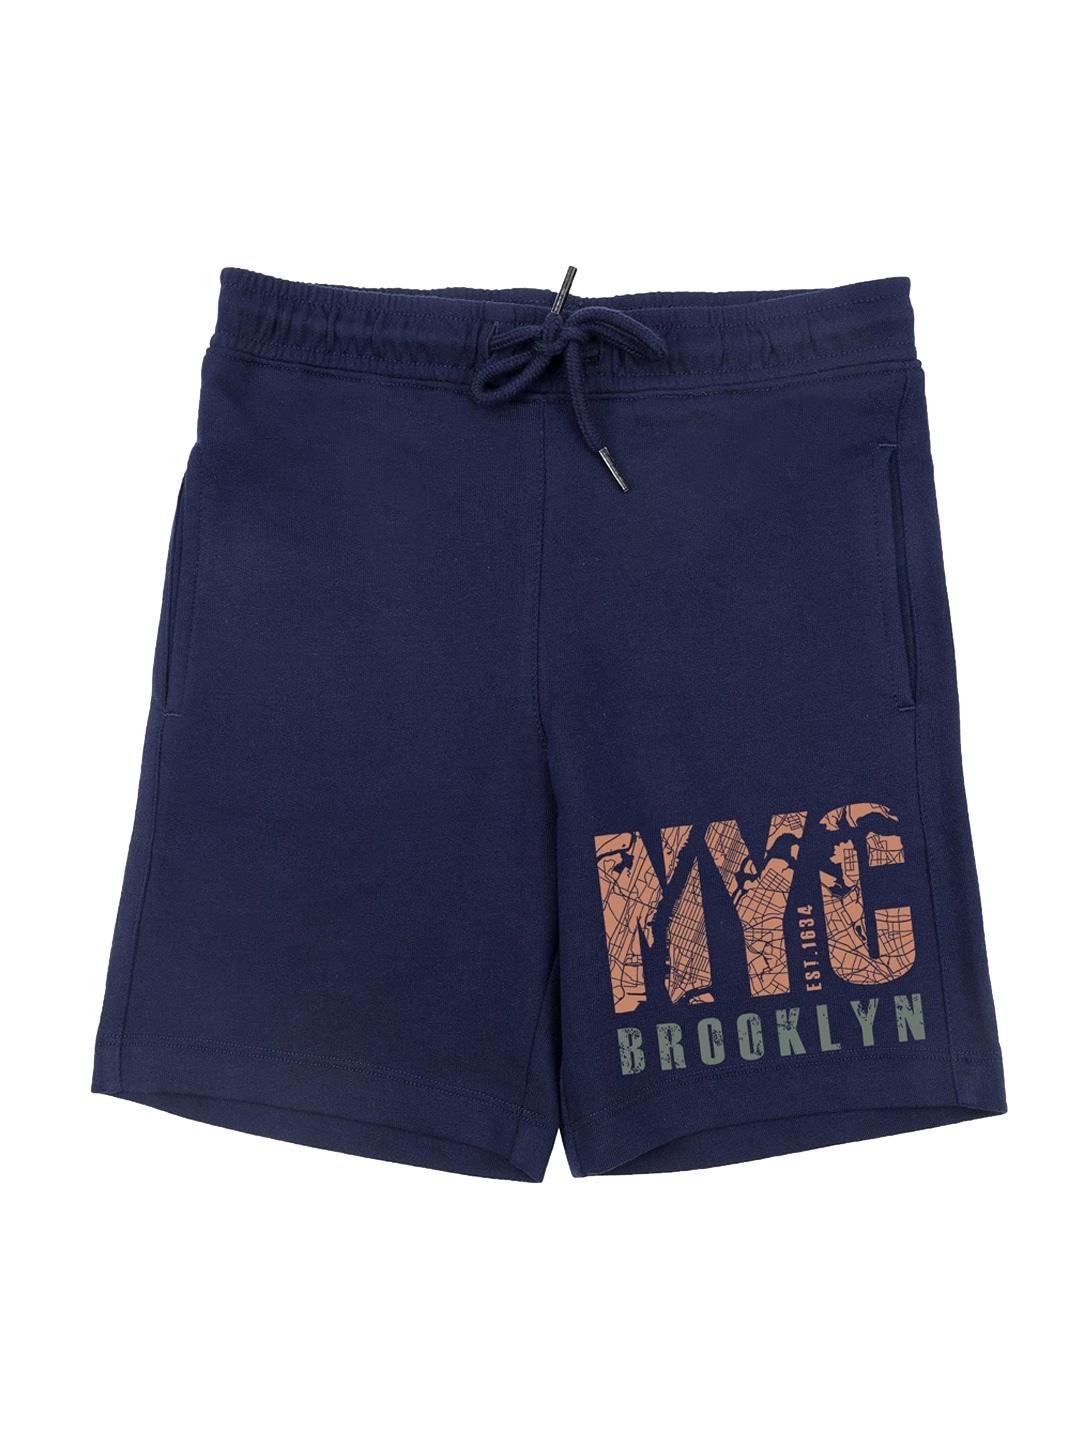 Wear Your Mind Boys Navy Blue & Peach-Coloured Typography Printed Shorts